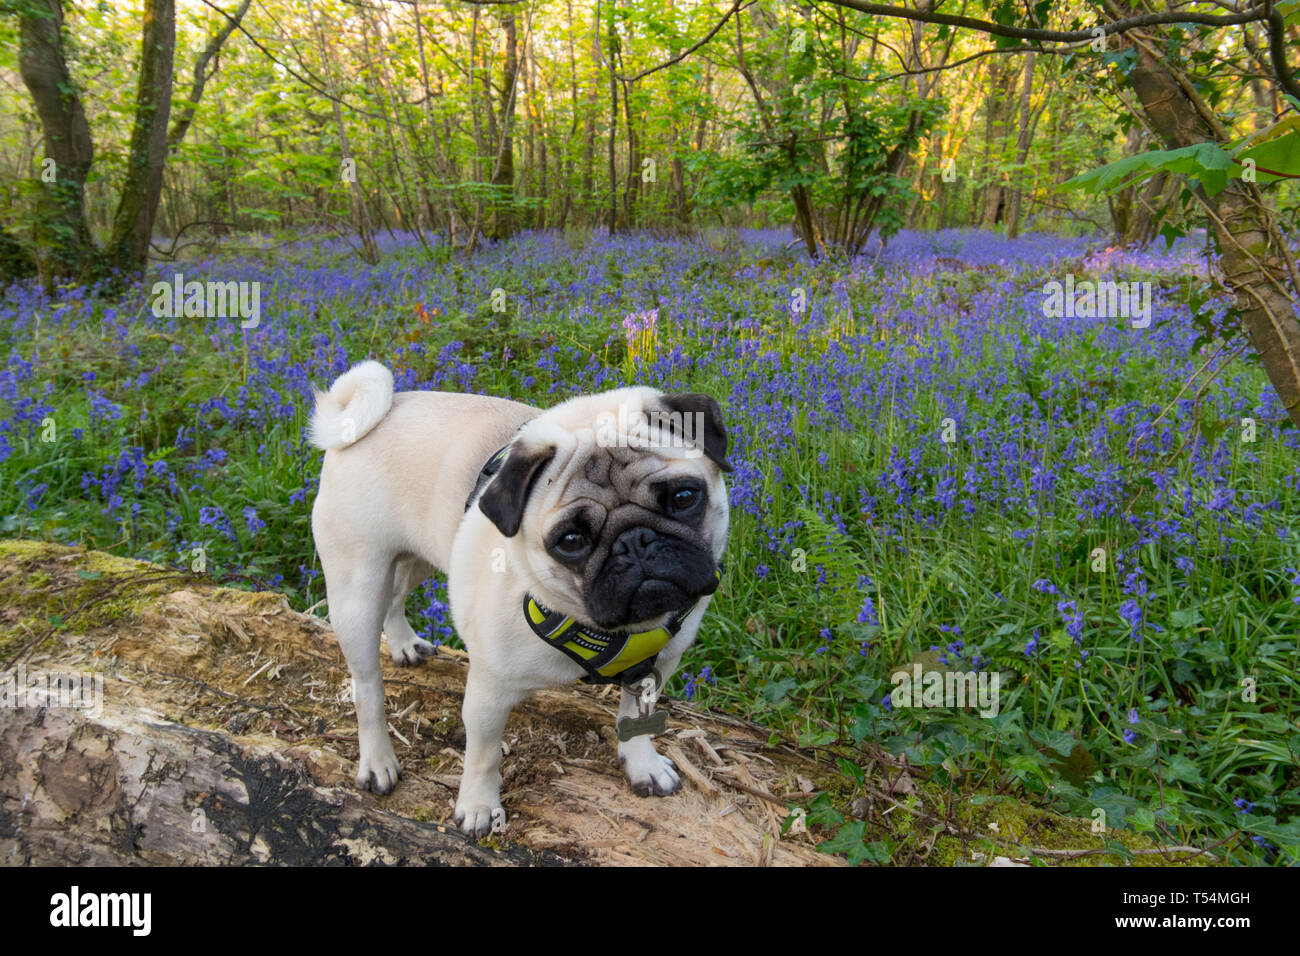 Titan the Pug sitting on a log in a bluebell wood in full bloom Stock Photo